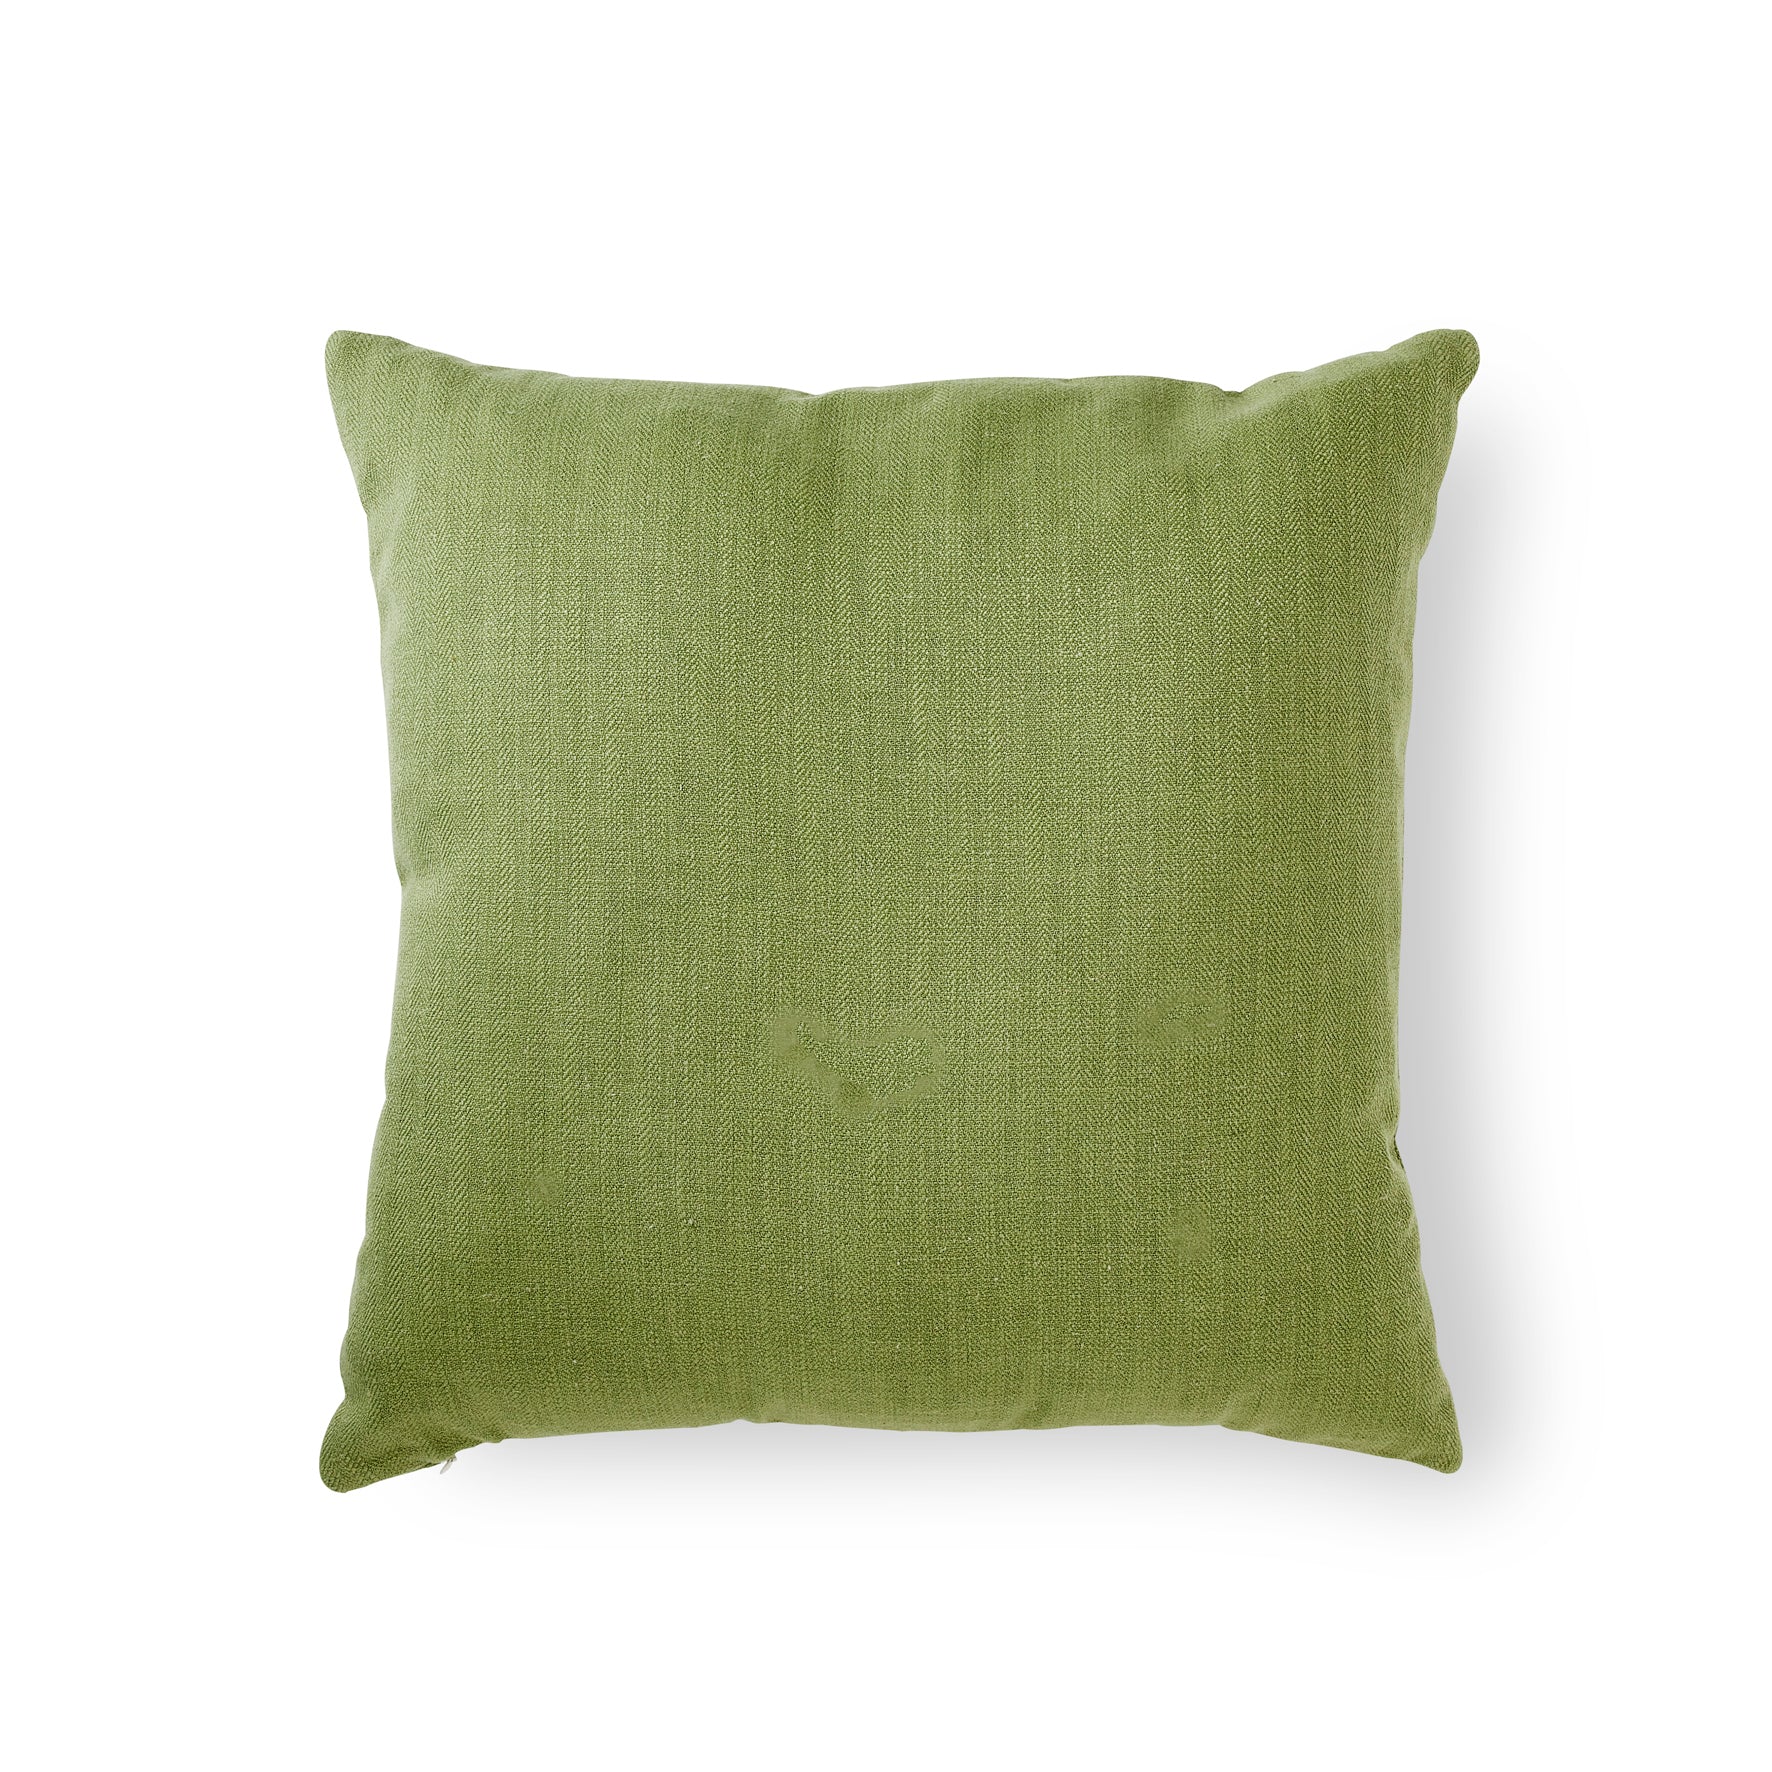 Luca Green Embroidered Cushion 50x50cm-Soft Furnishings-Madras Link-The Bay Room